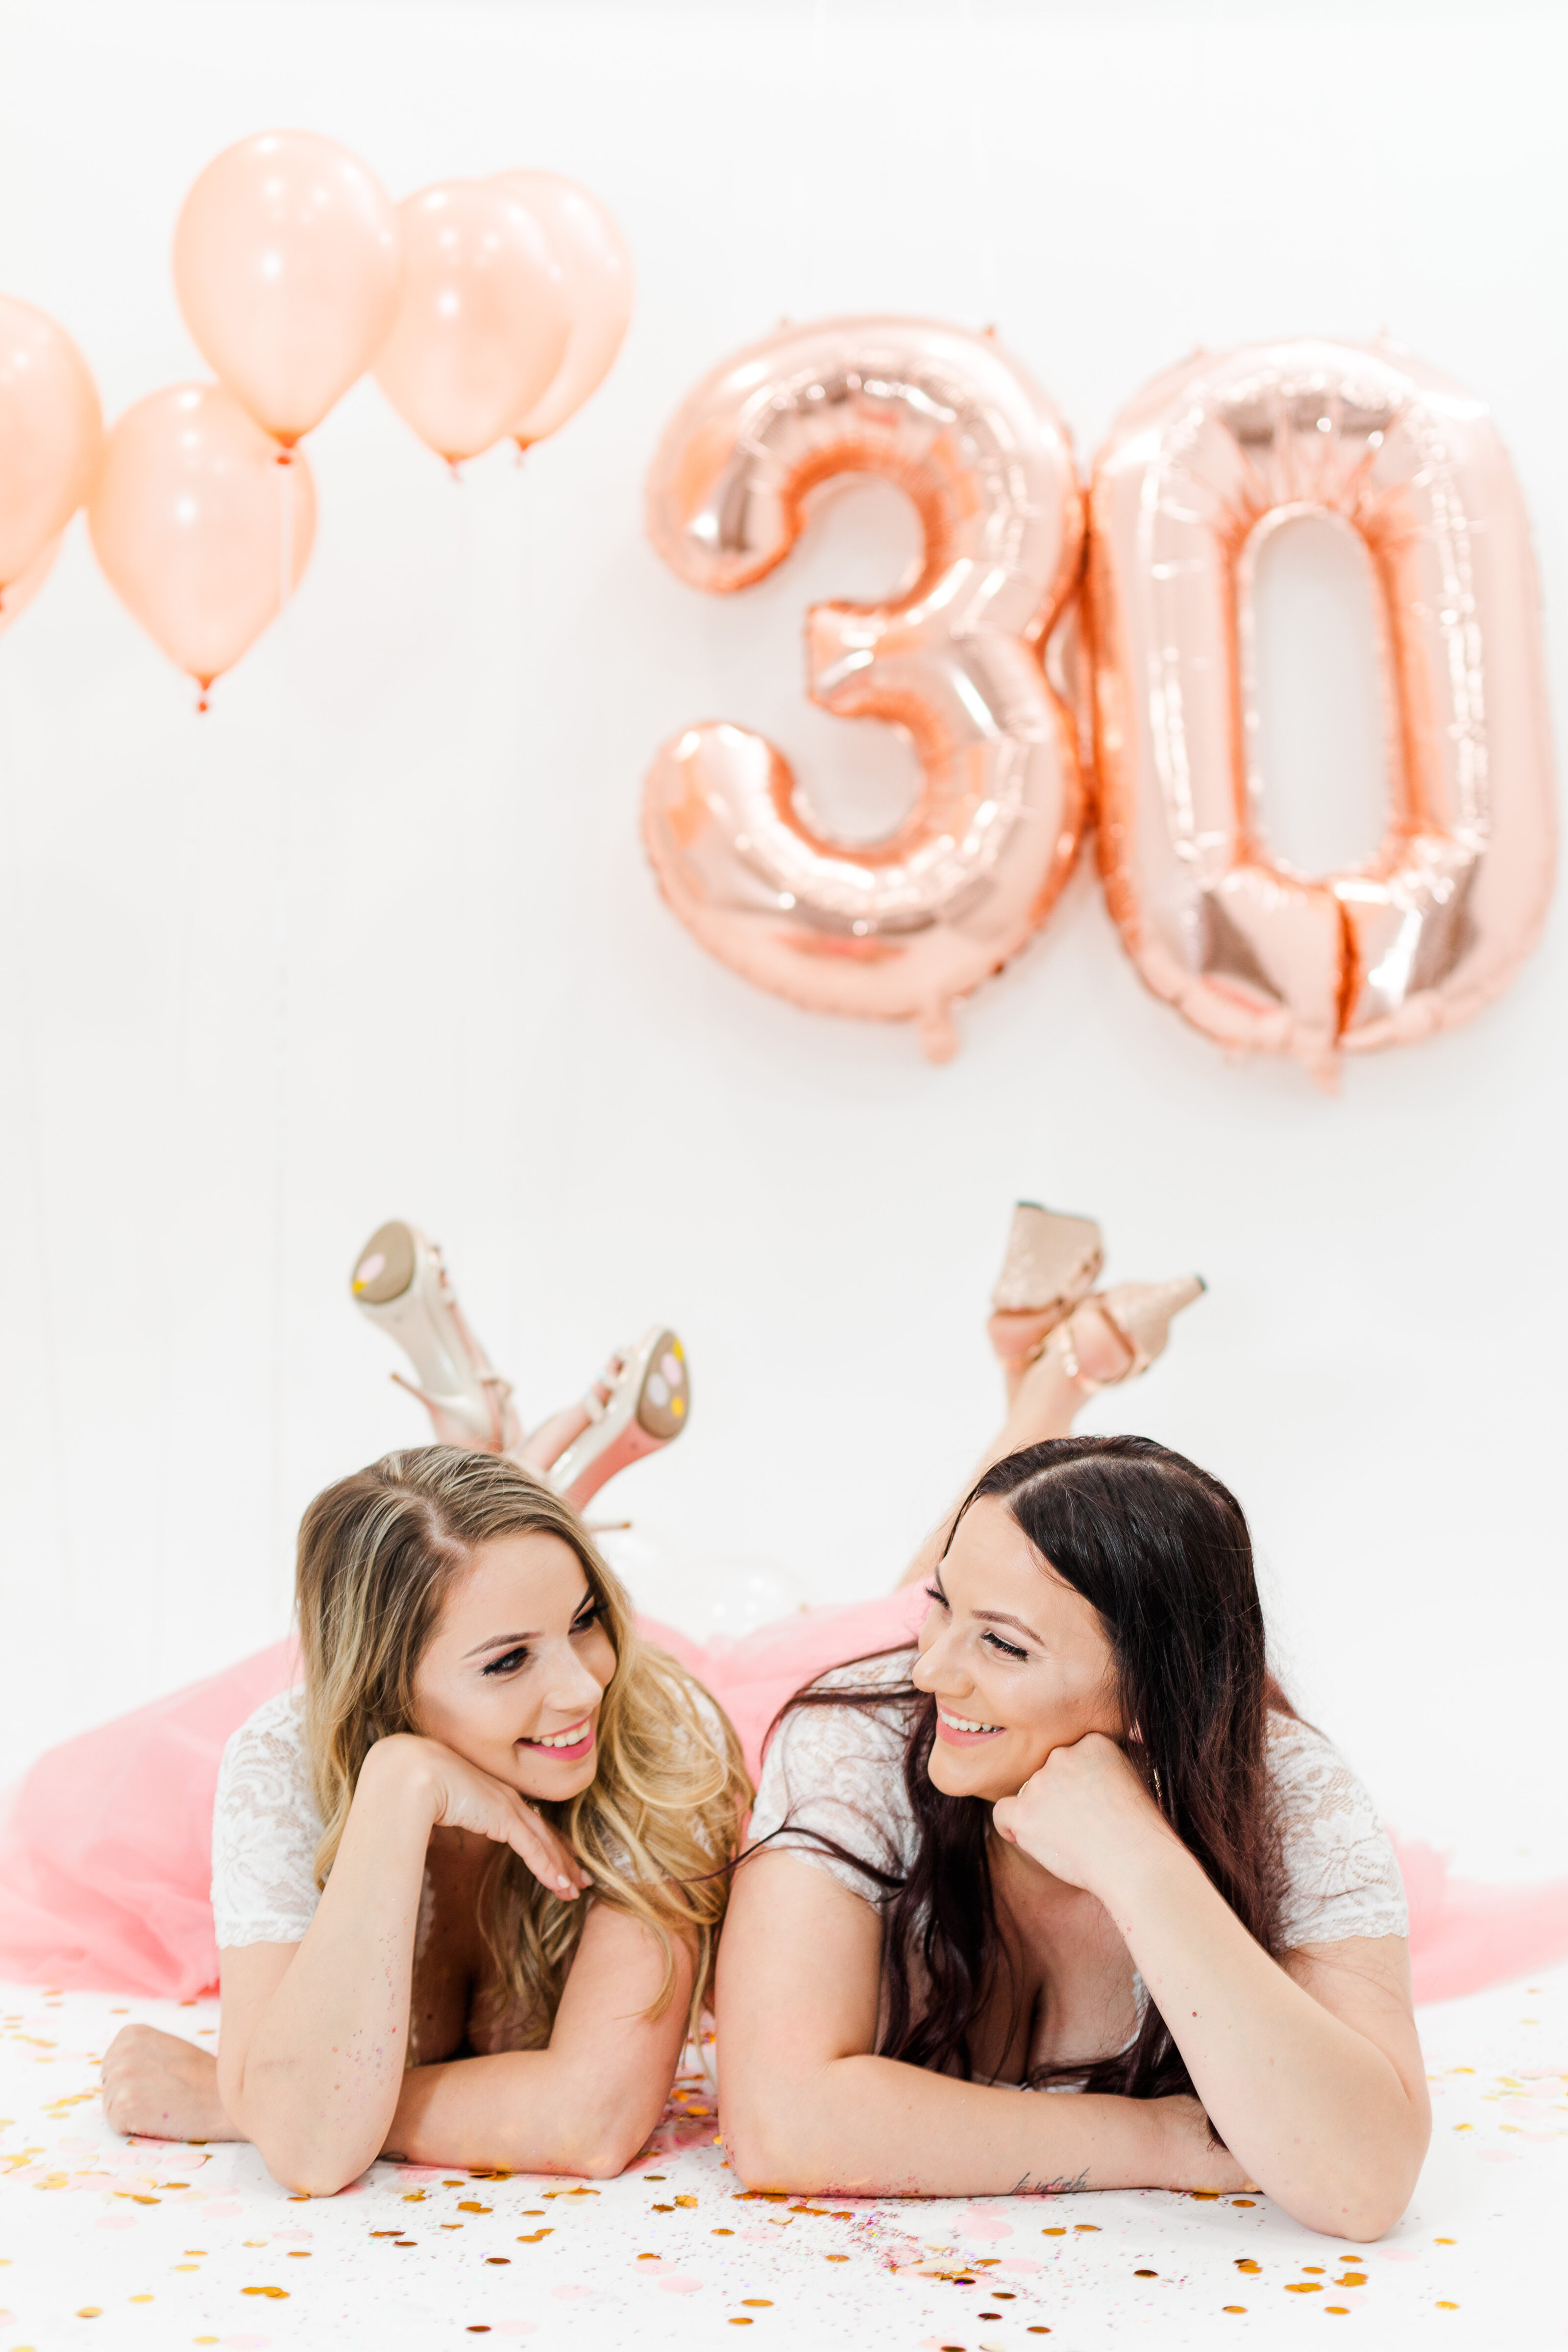 jeanizecilliersphotography-30thbirthday-131